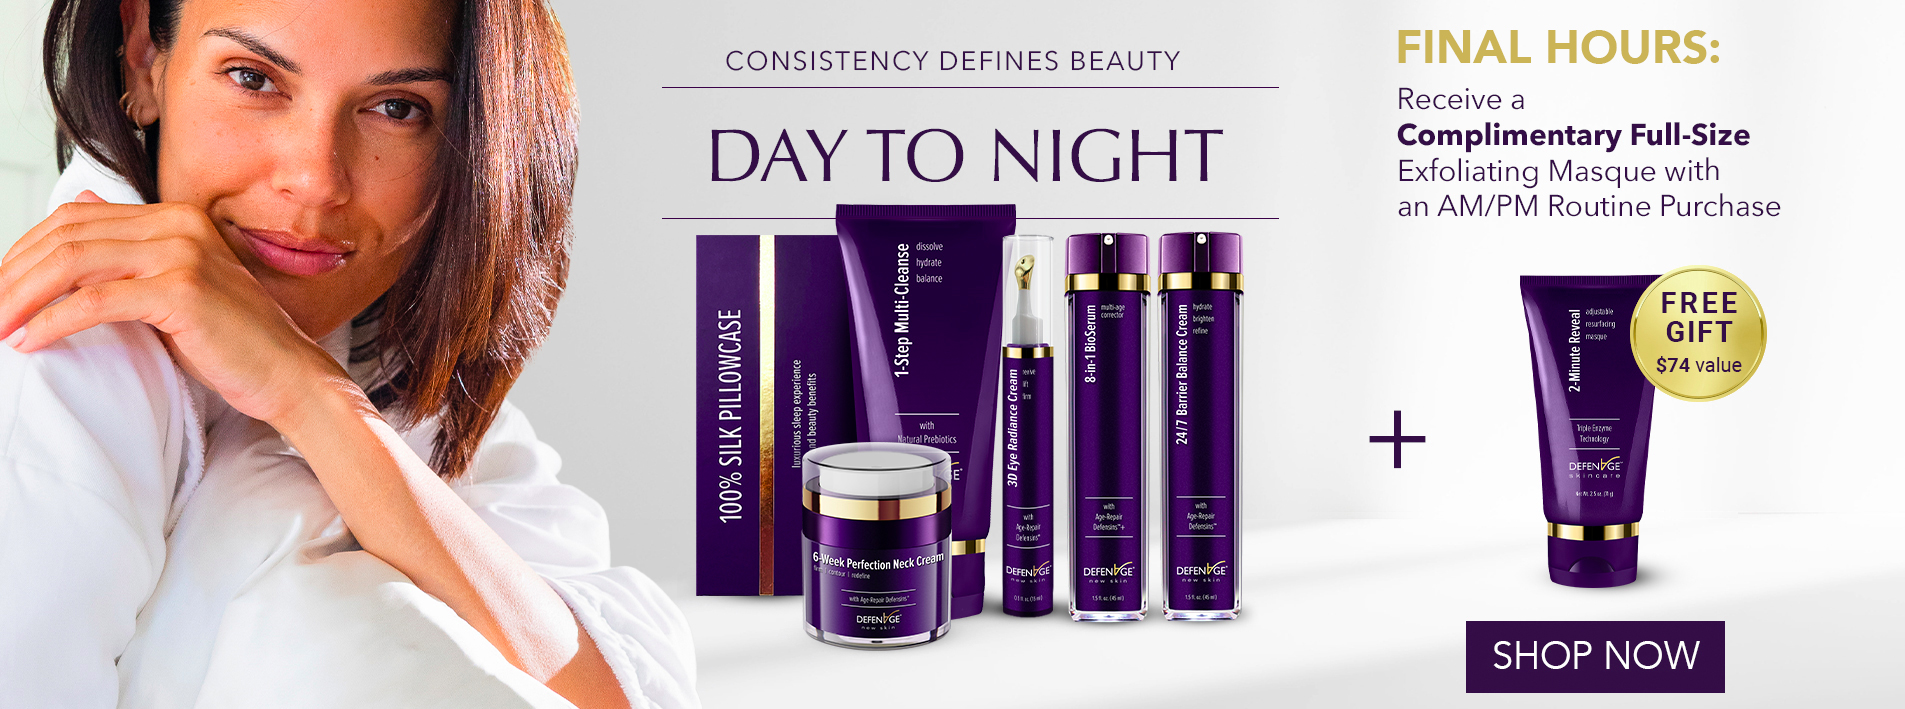 Free Masque with Morning & Night Routine Purchase